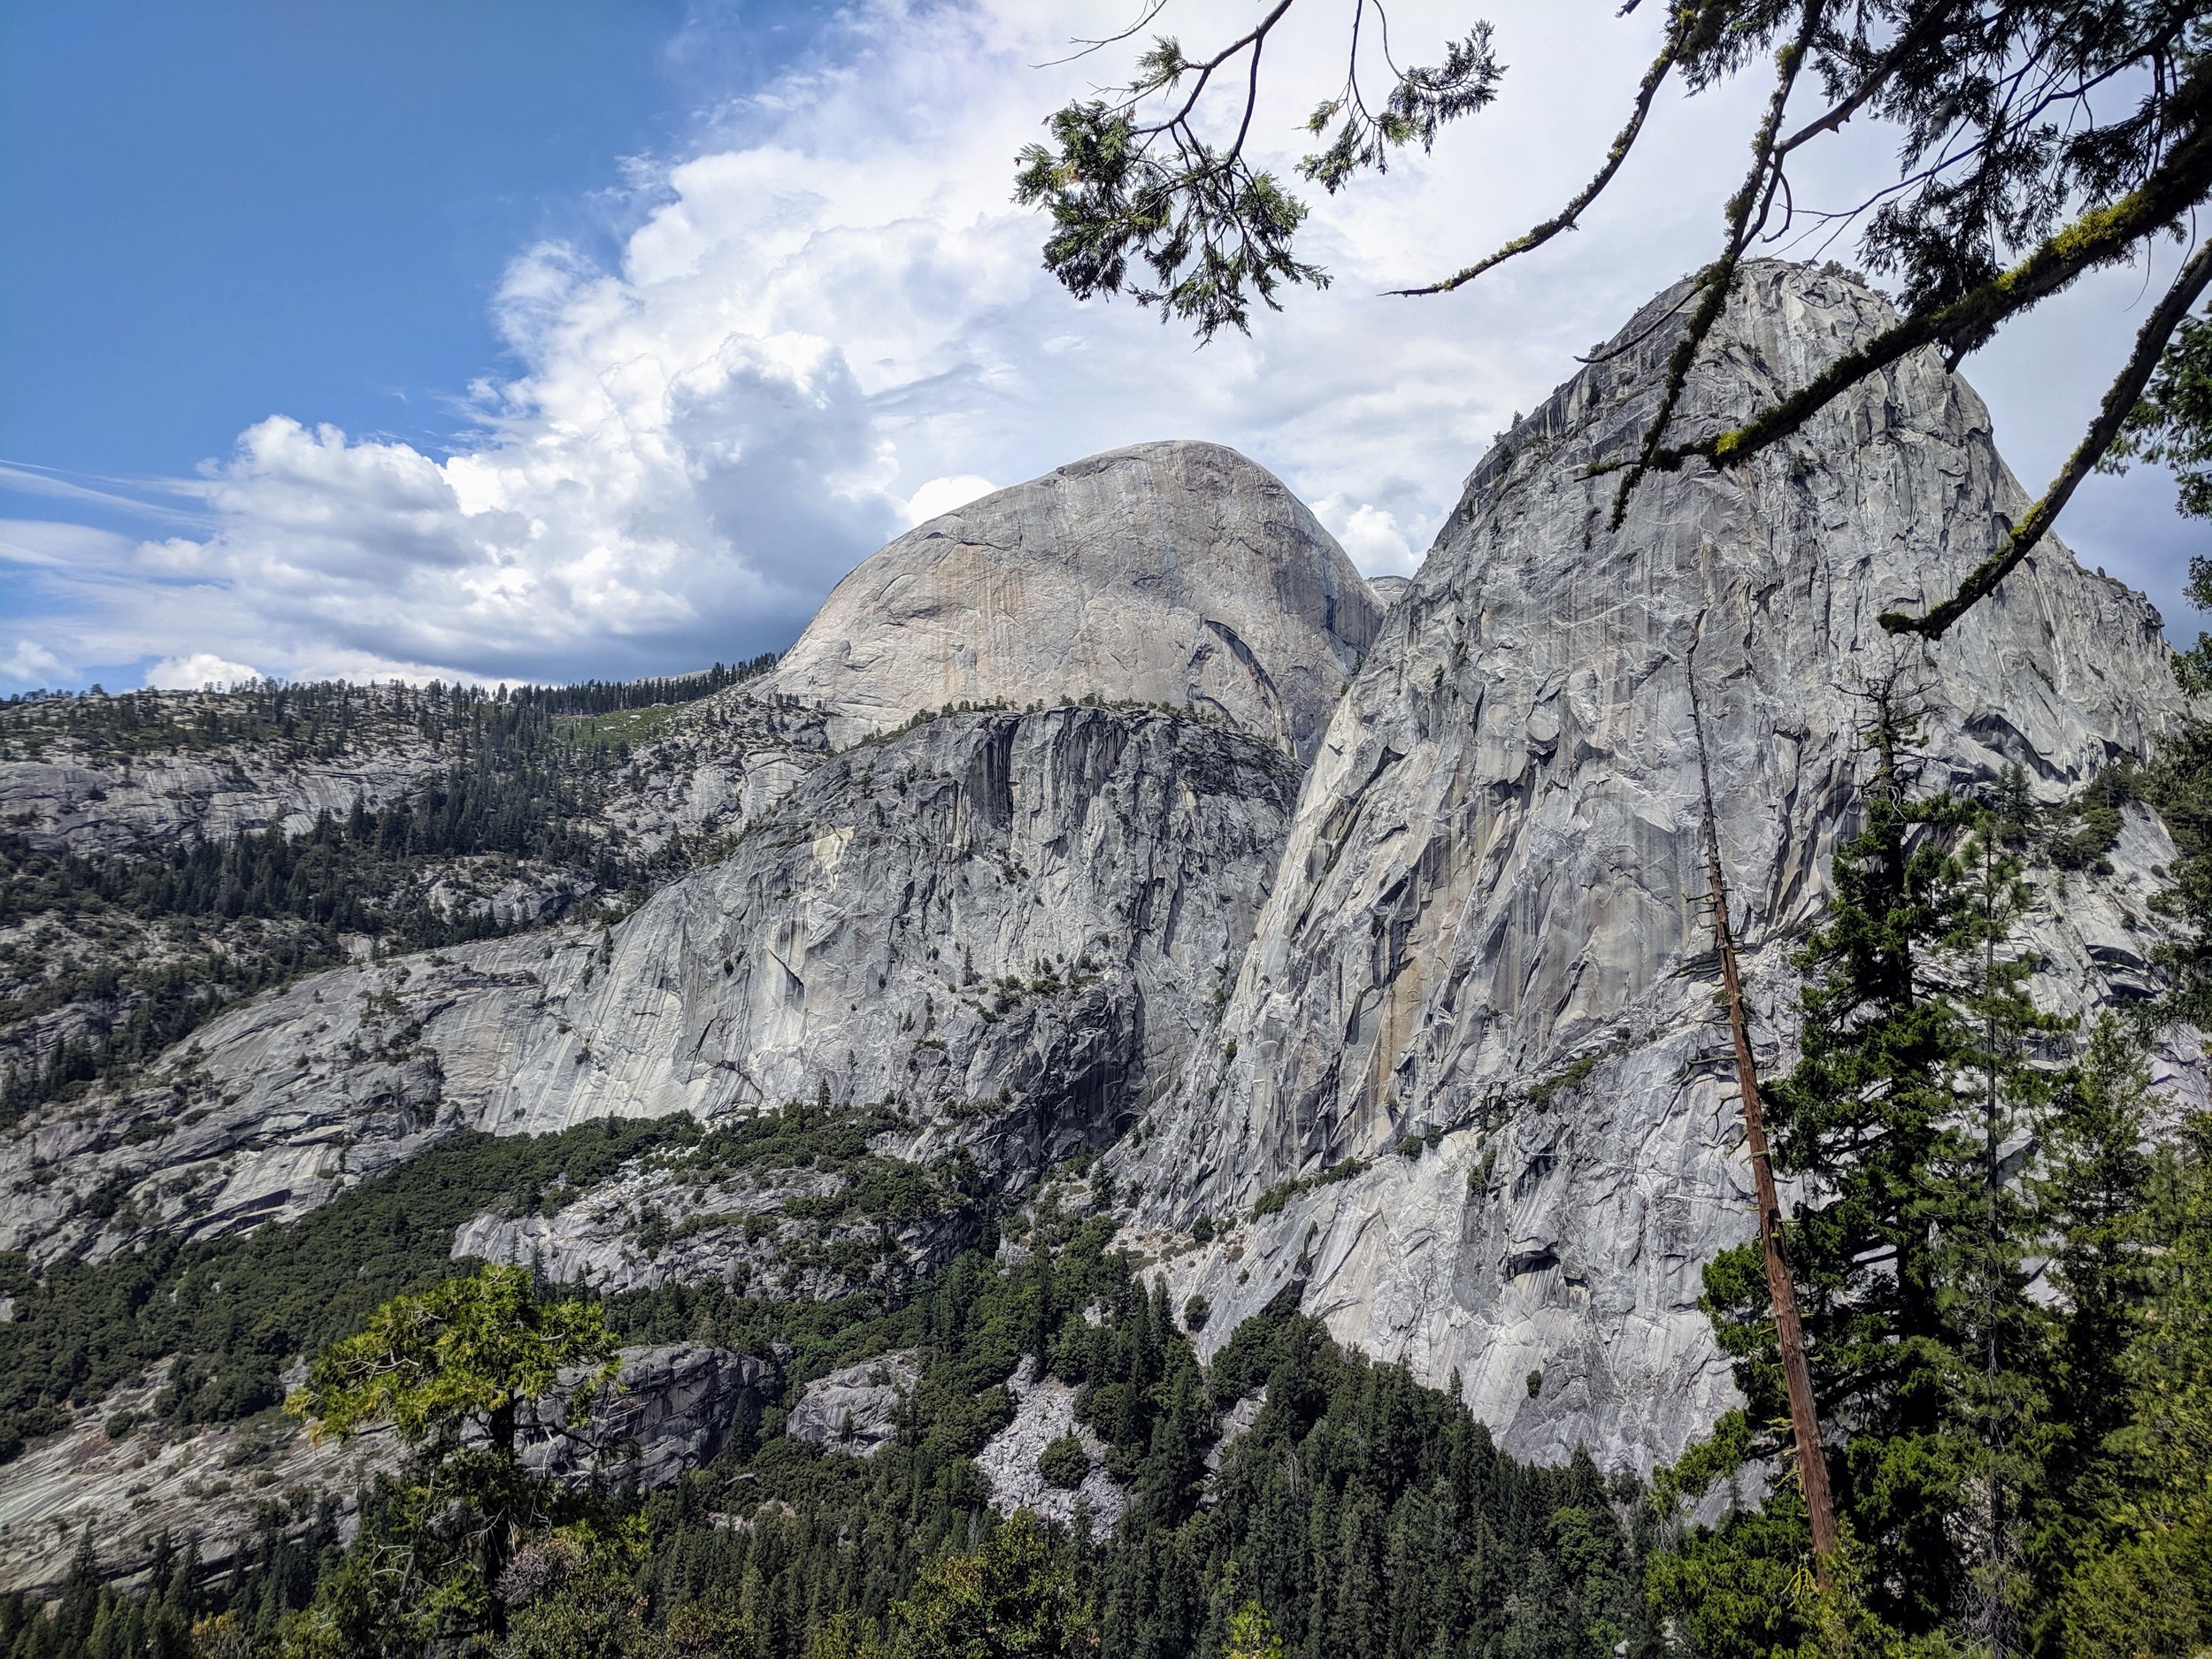  Half Dome (left) and Liberty Cap as seen from John Muir Trail in Yosemite. 